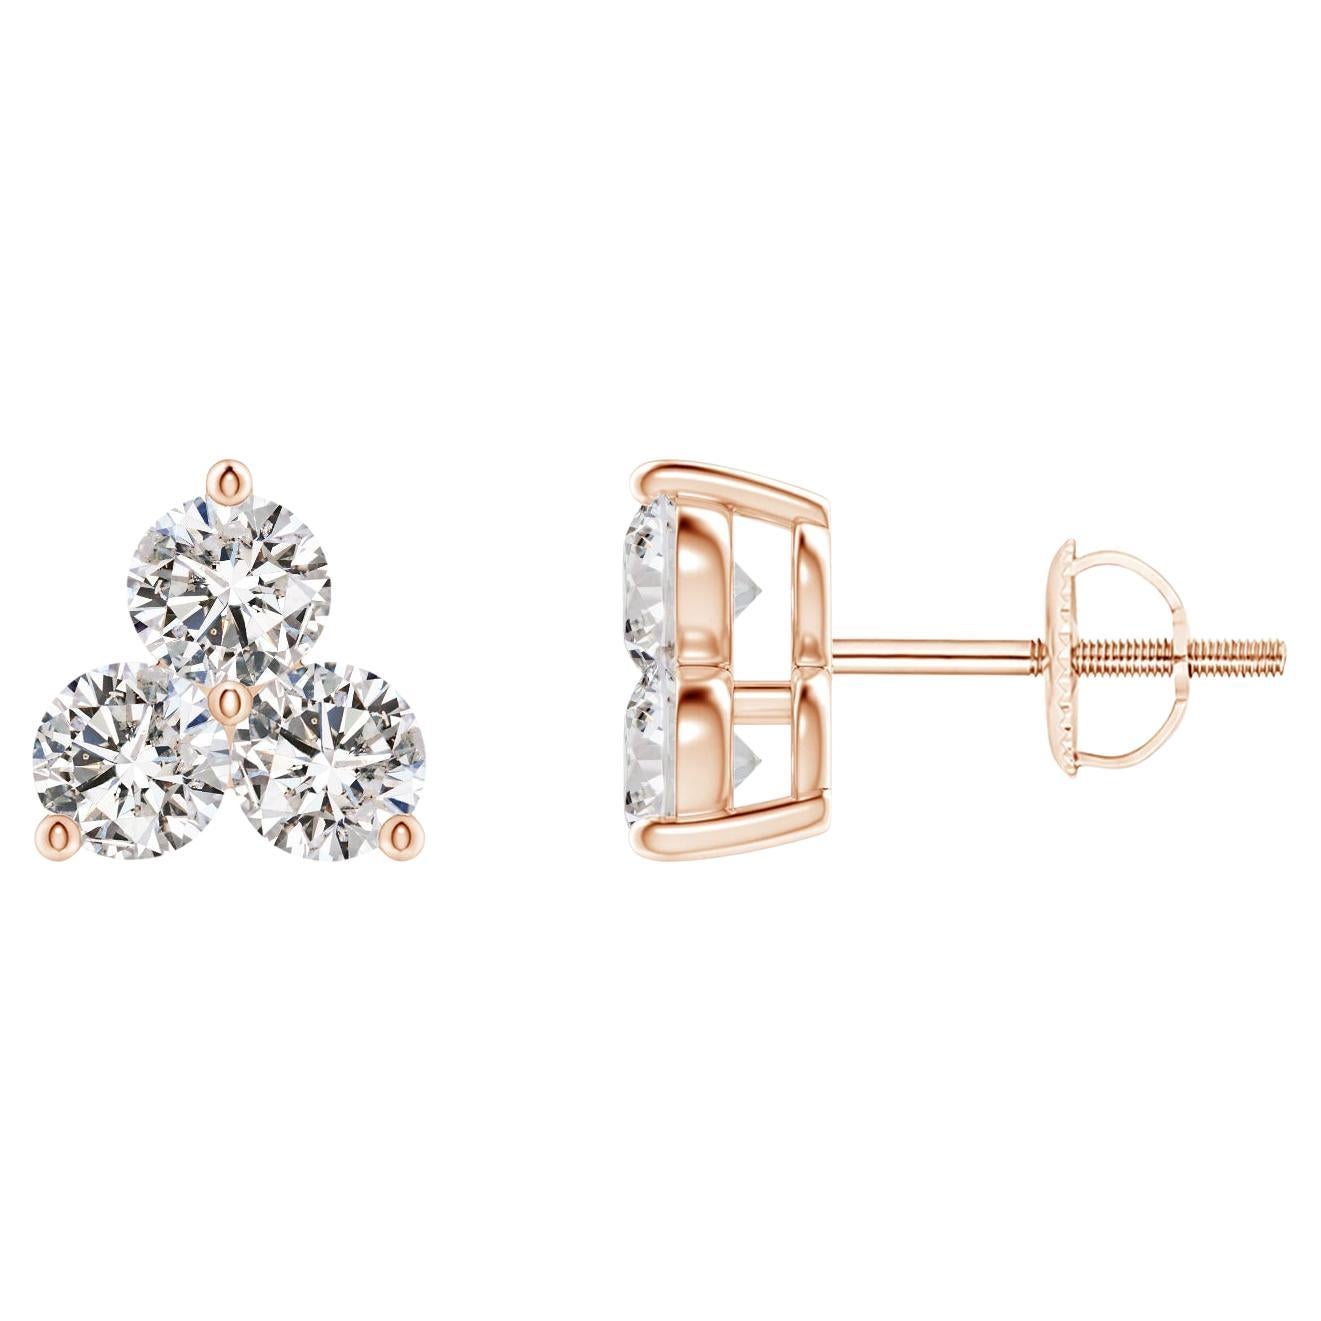 Natural Diamond Stud Earrings in 14K Rose Gold (0.5cttw Color-I-J  Clarity-I1I2)